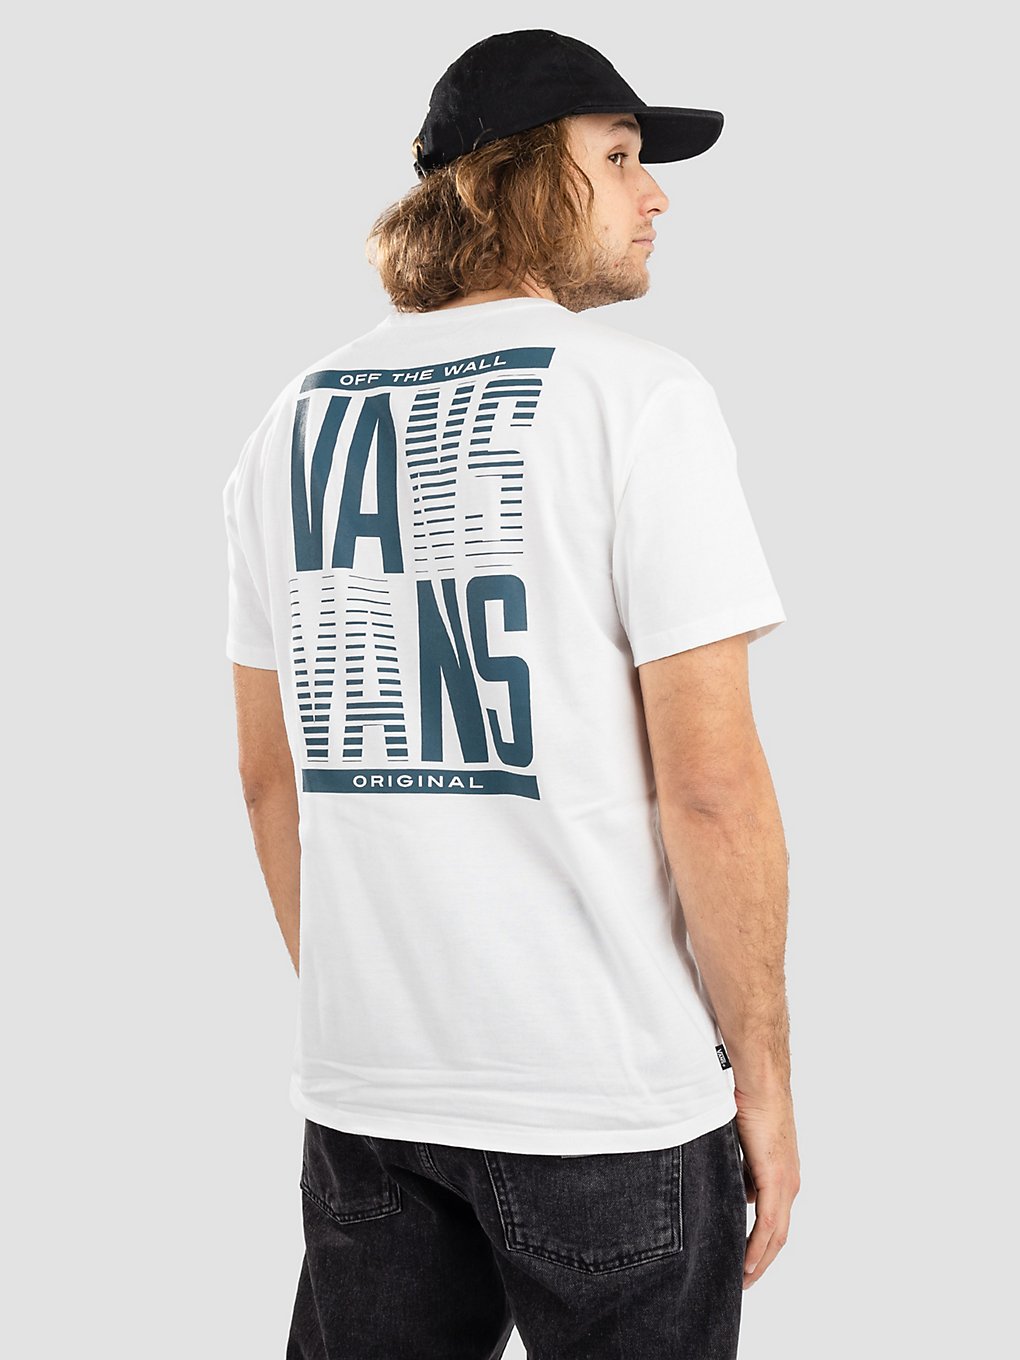 Vans Off The Wall Stacked Typed T-Shirt wit